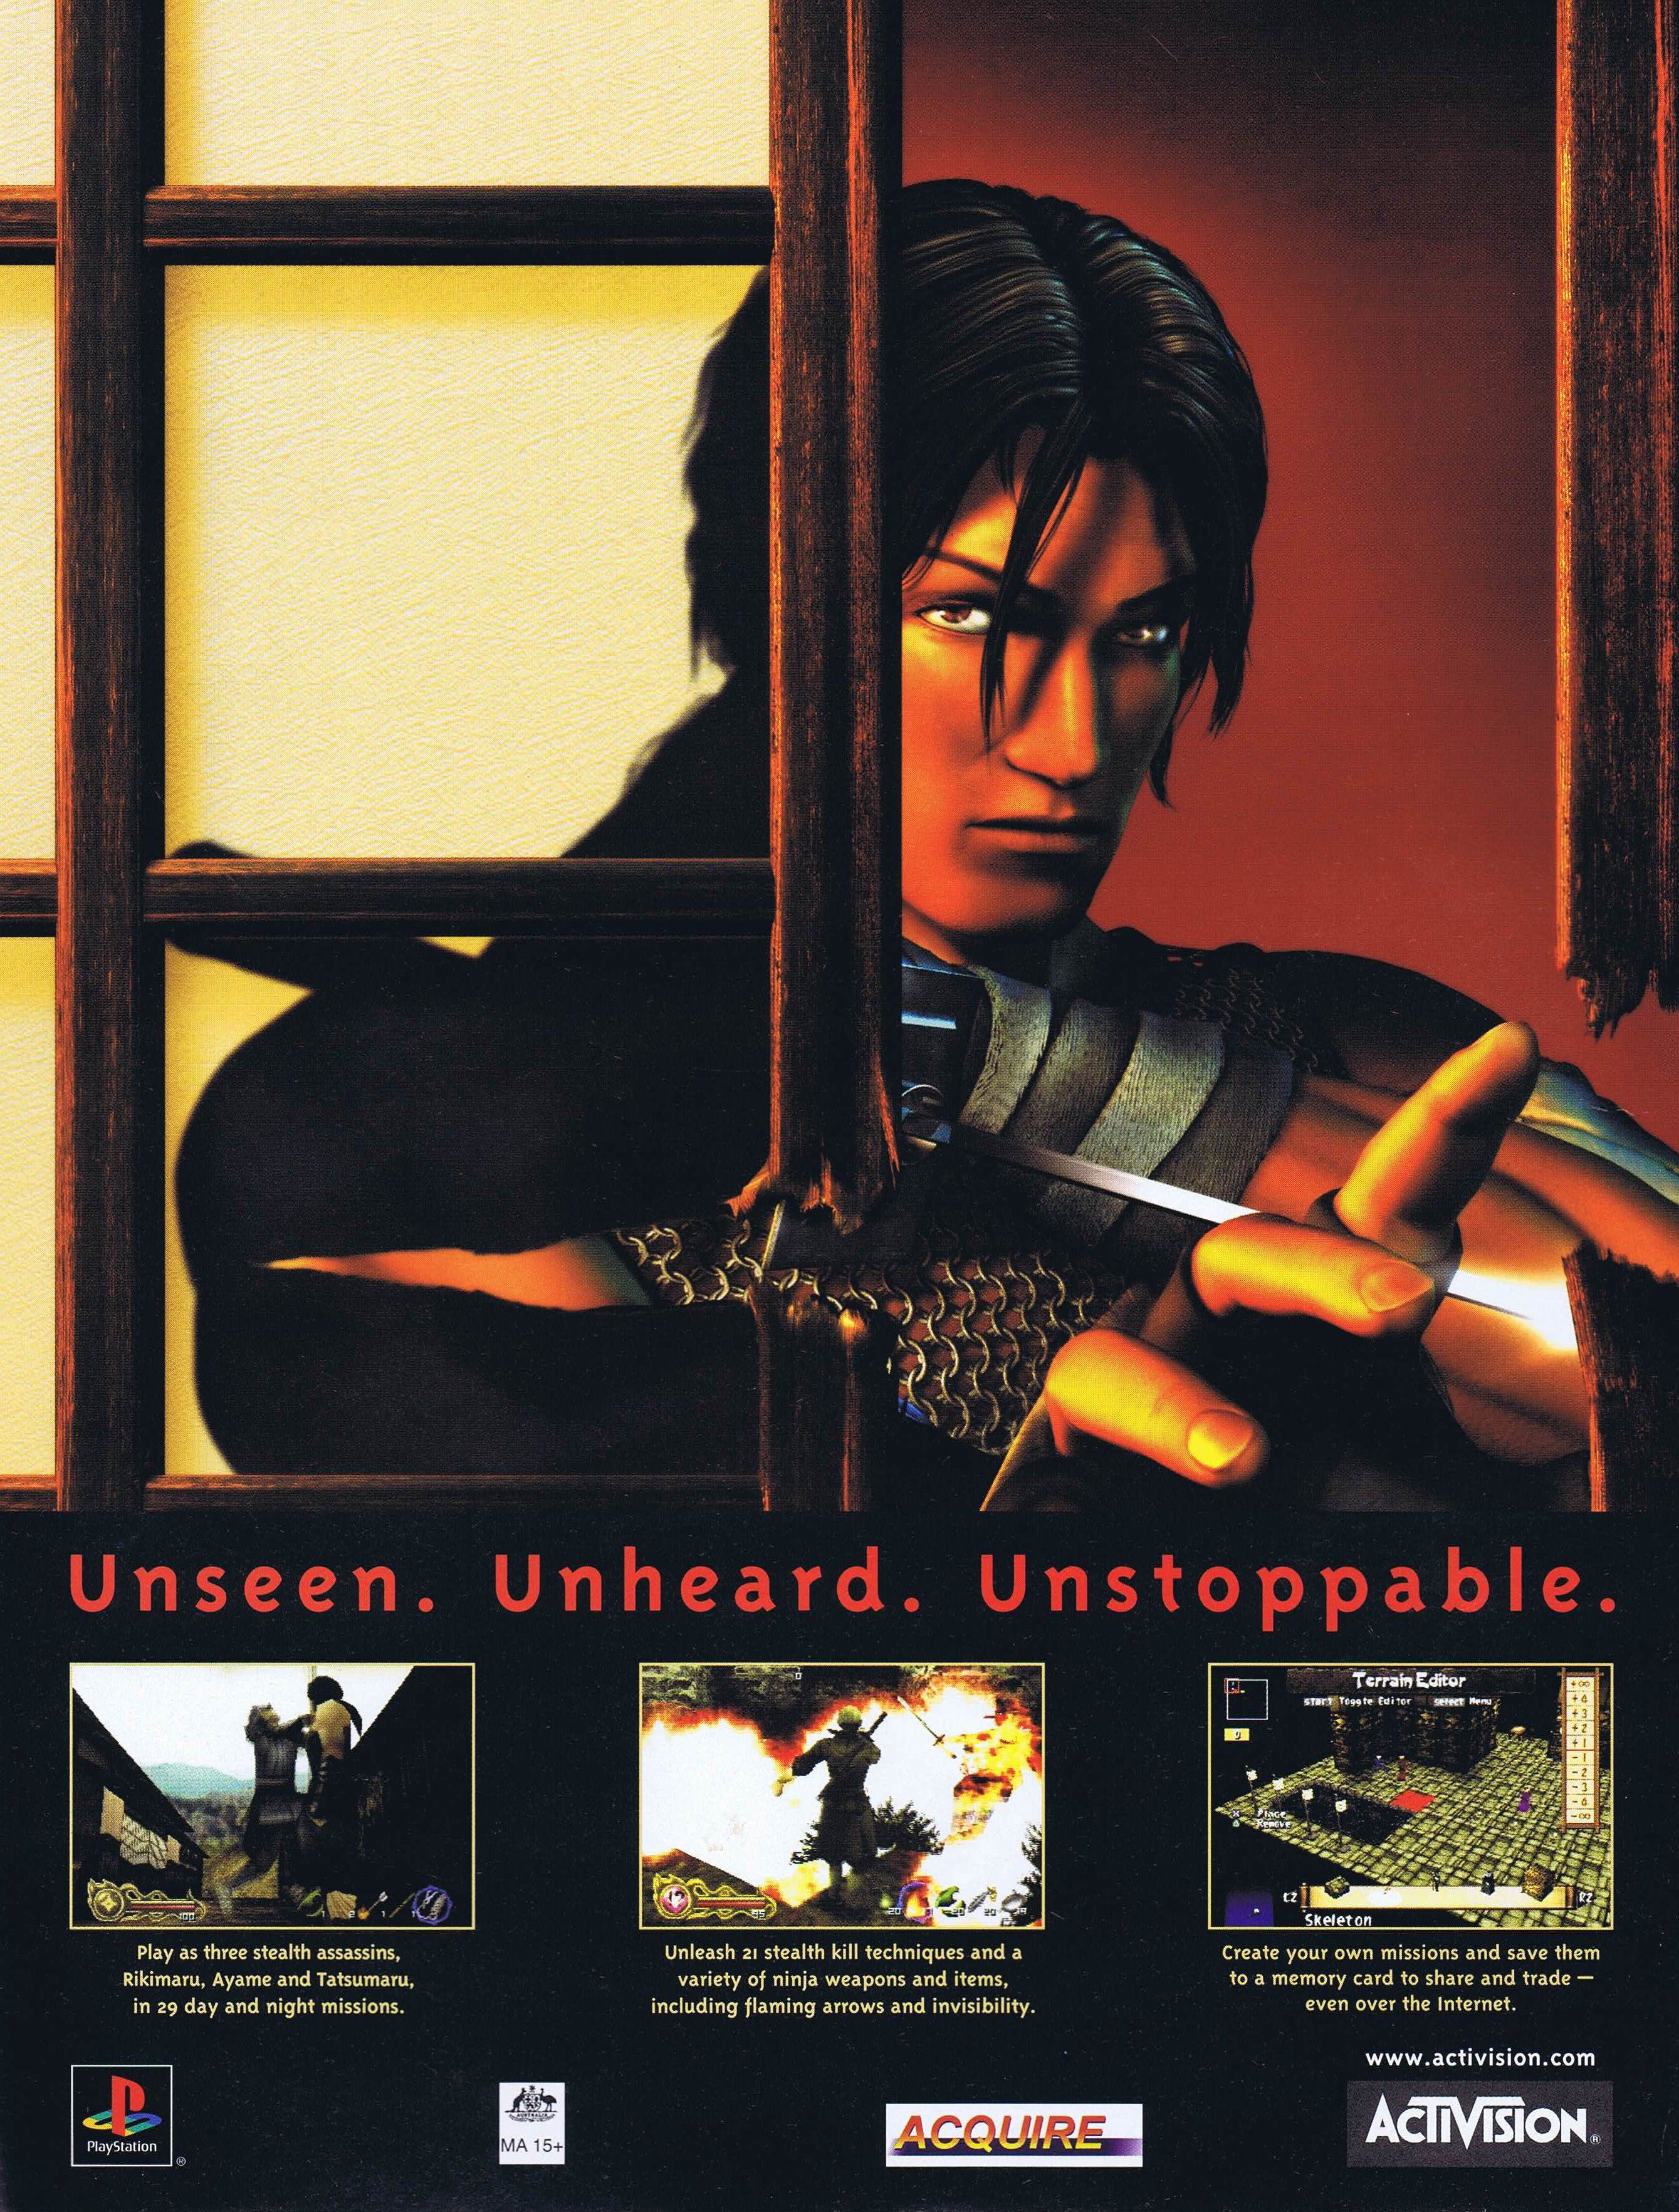 Tenchu 2 - Birth of the Stealth Assassins PSX cover